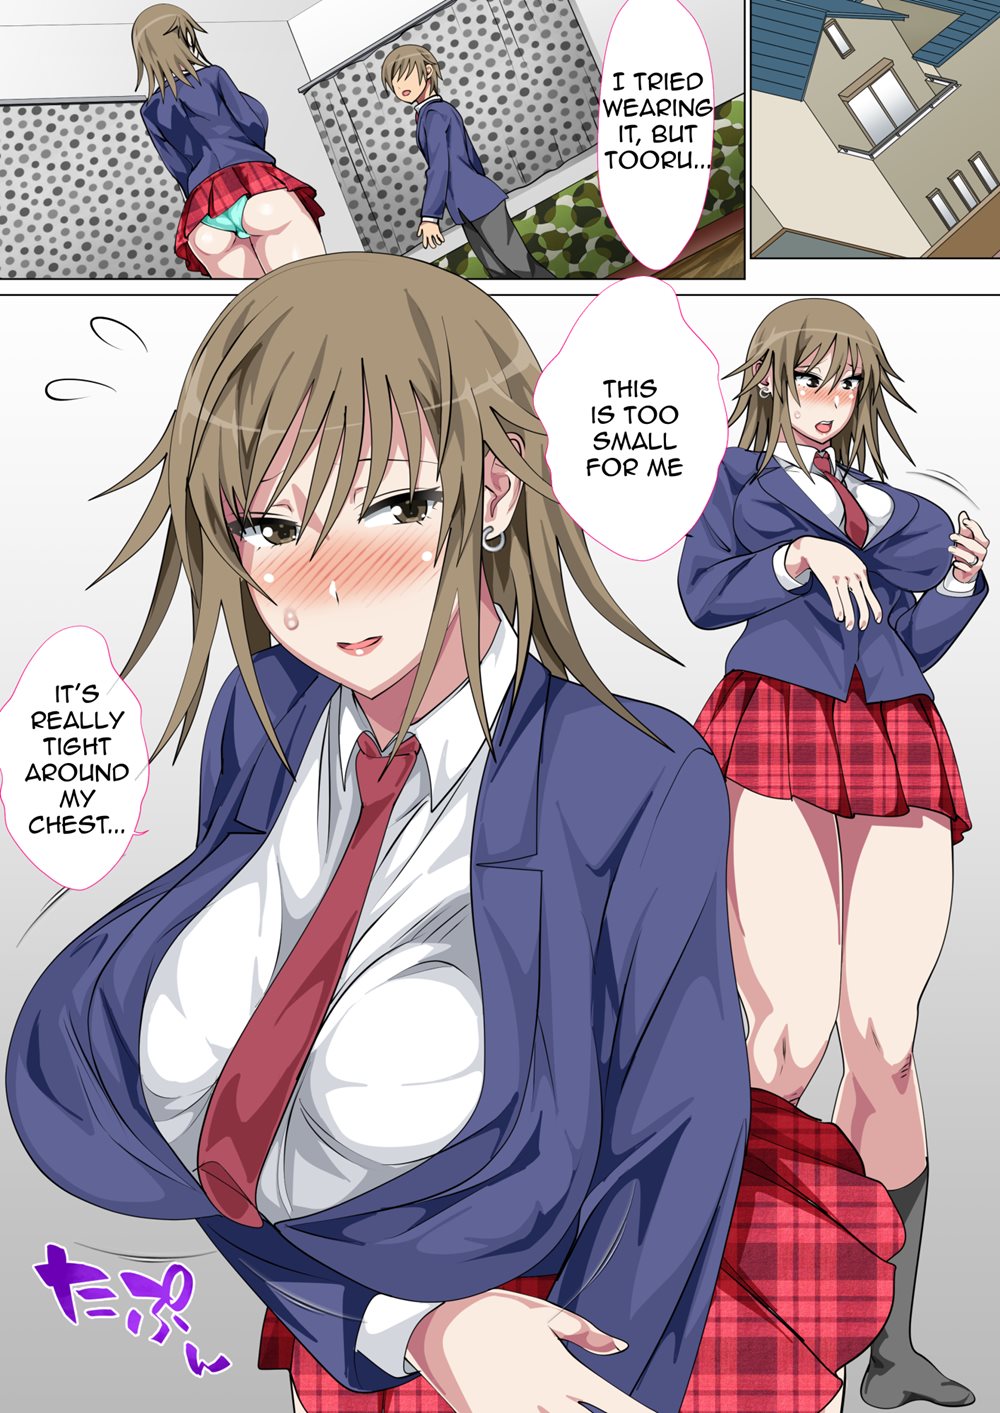 Page 75 | The Consequences of A Mother Being Dragged Into Making A Sex Video  Because of Her Son Getting Bullied (Original) - Chapter 1: Ijimerarekko No  Hahaoya Ga Hamedori Suru Batsu